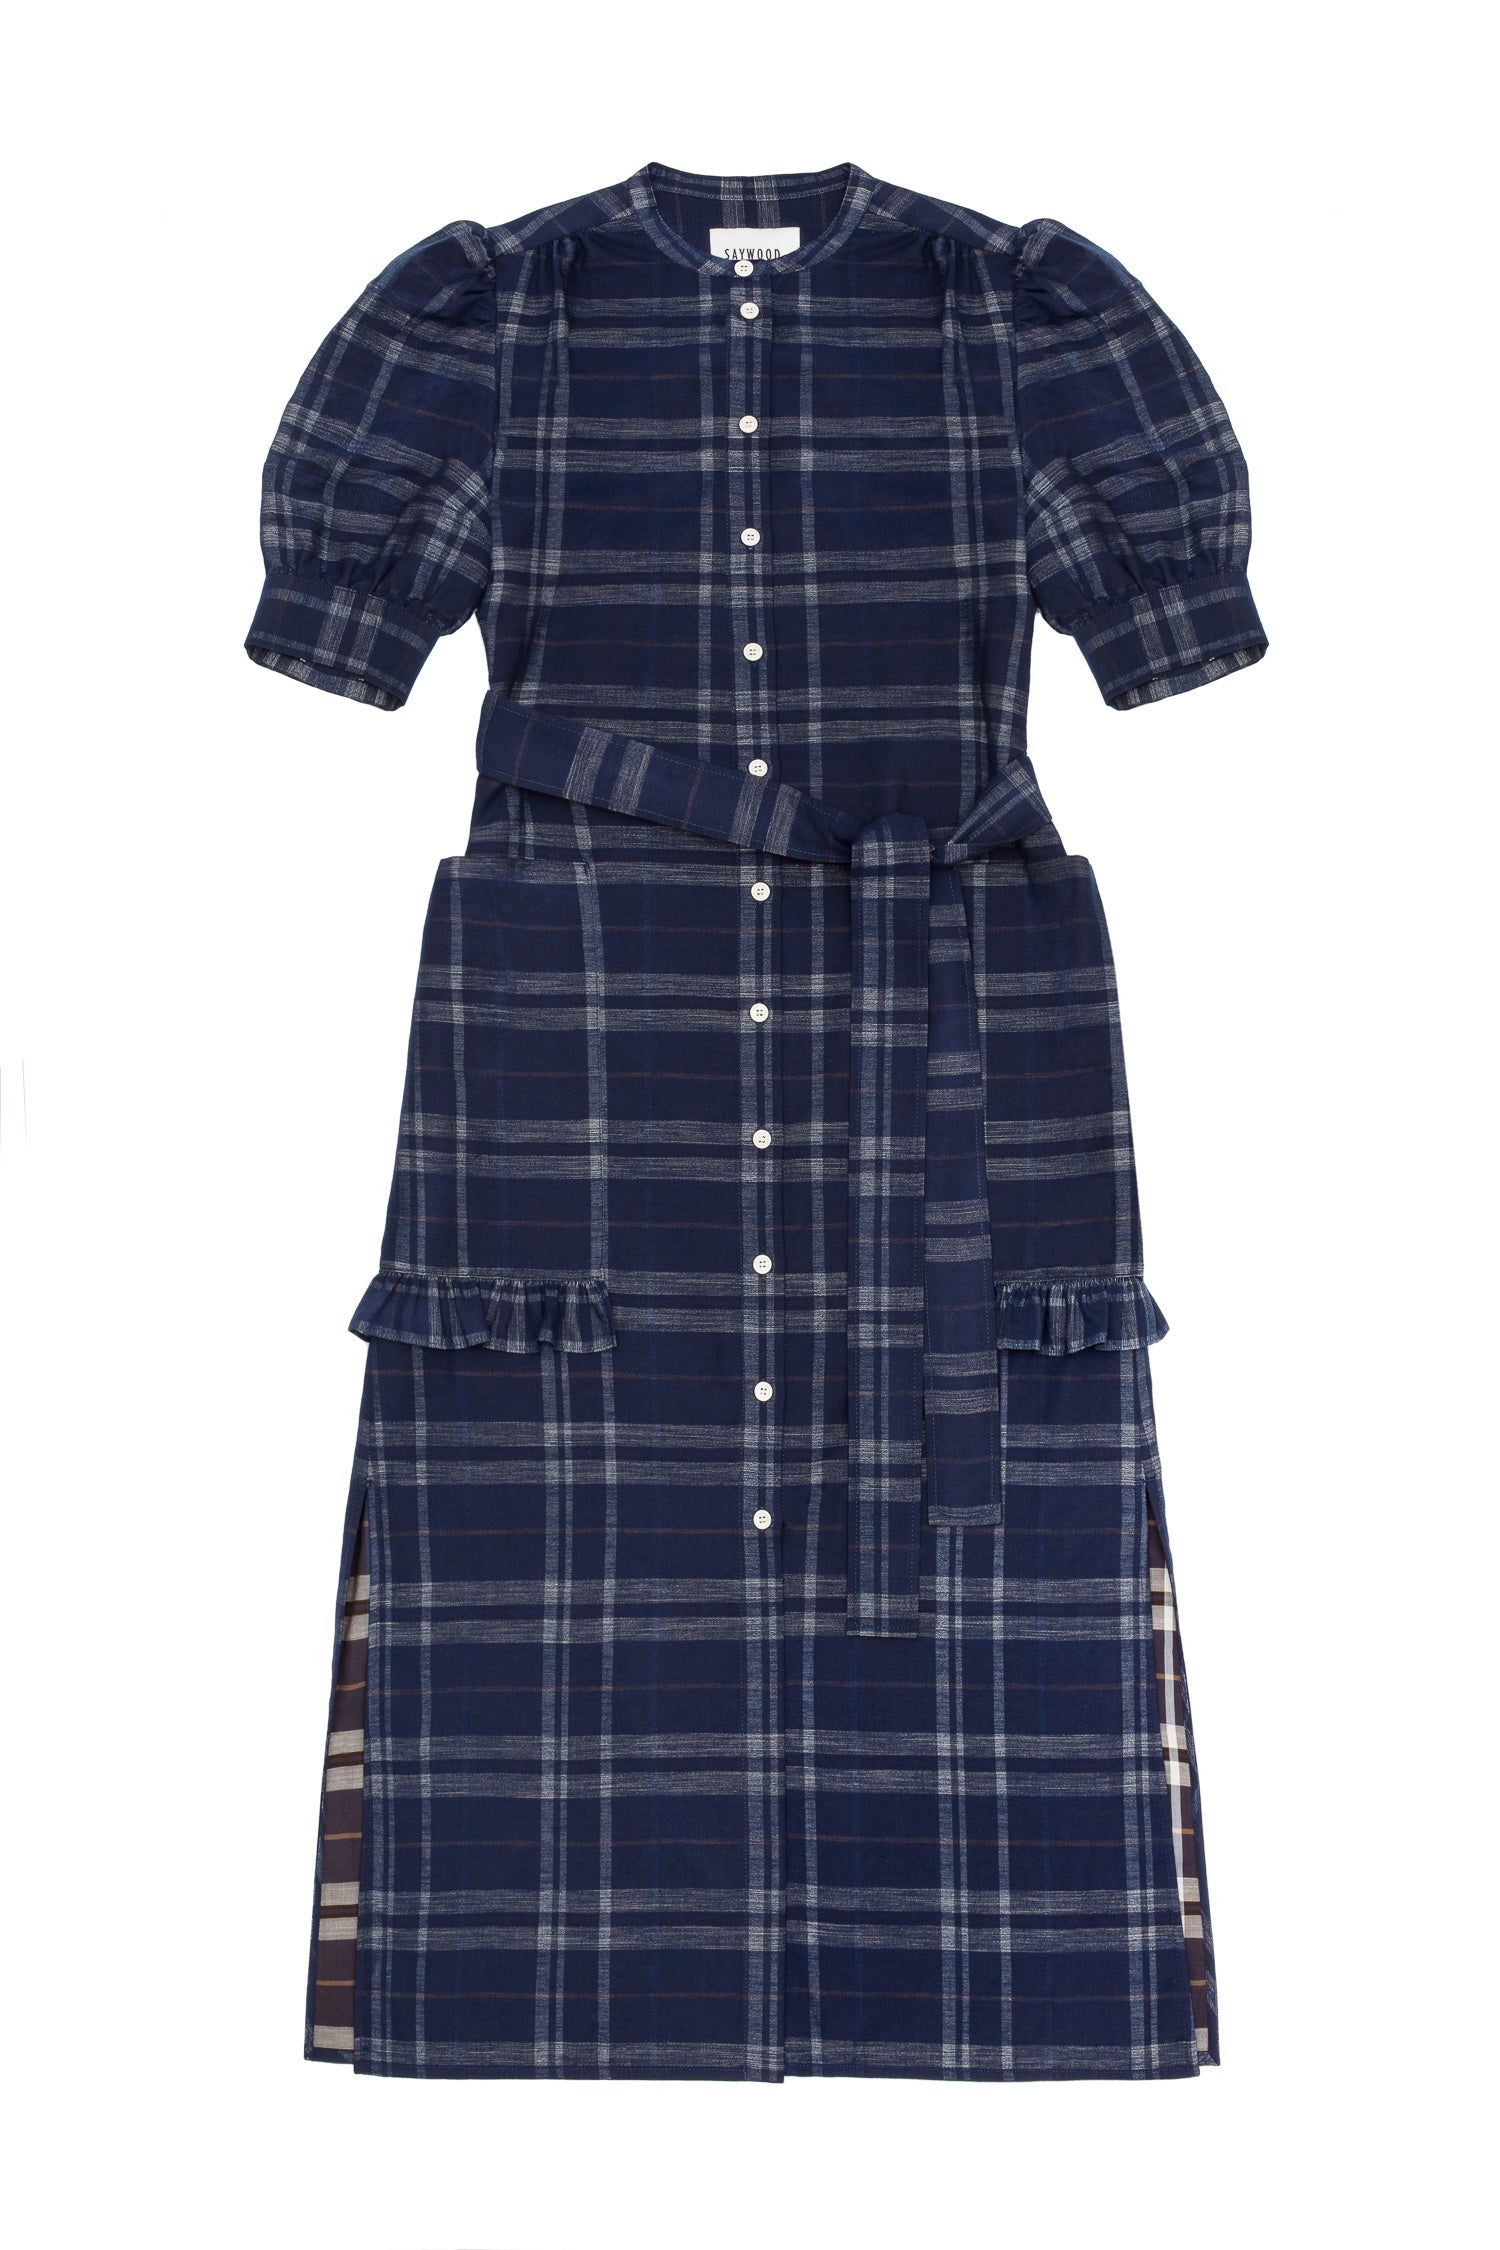 Womens navy check puff sleeve dress, long line with side splits at the hem. The Rosa Dress by Saywood has patch pockets at the hip with ruffles at the bottom of the pockets, with a tied matching belt around the waist. Dress is on a white background.